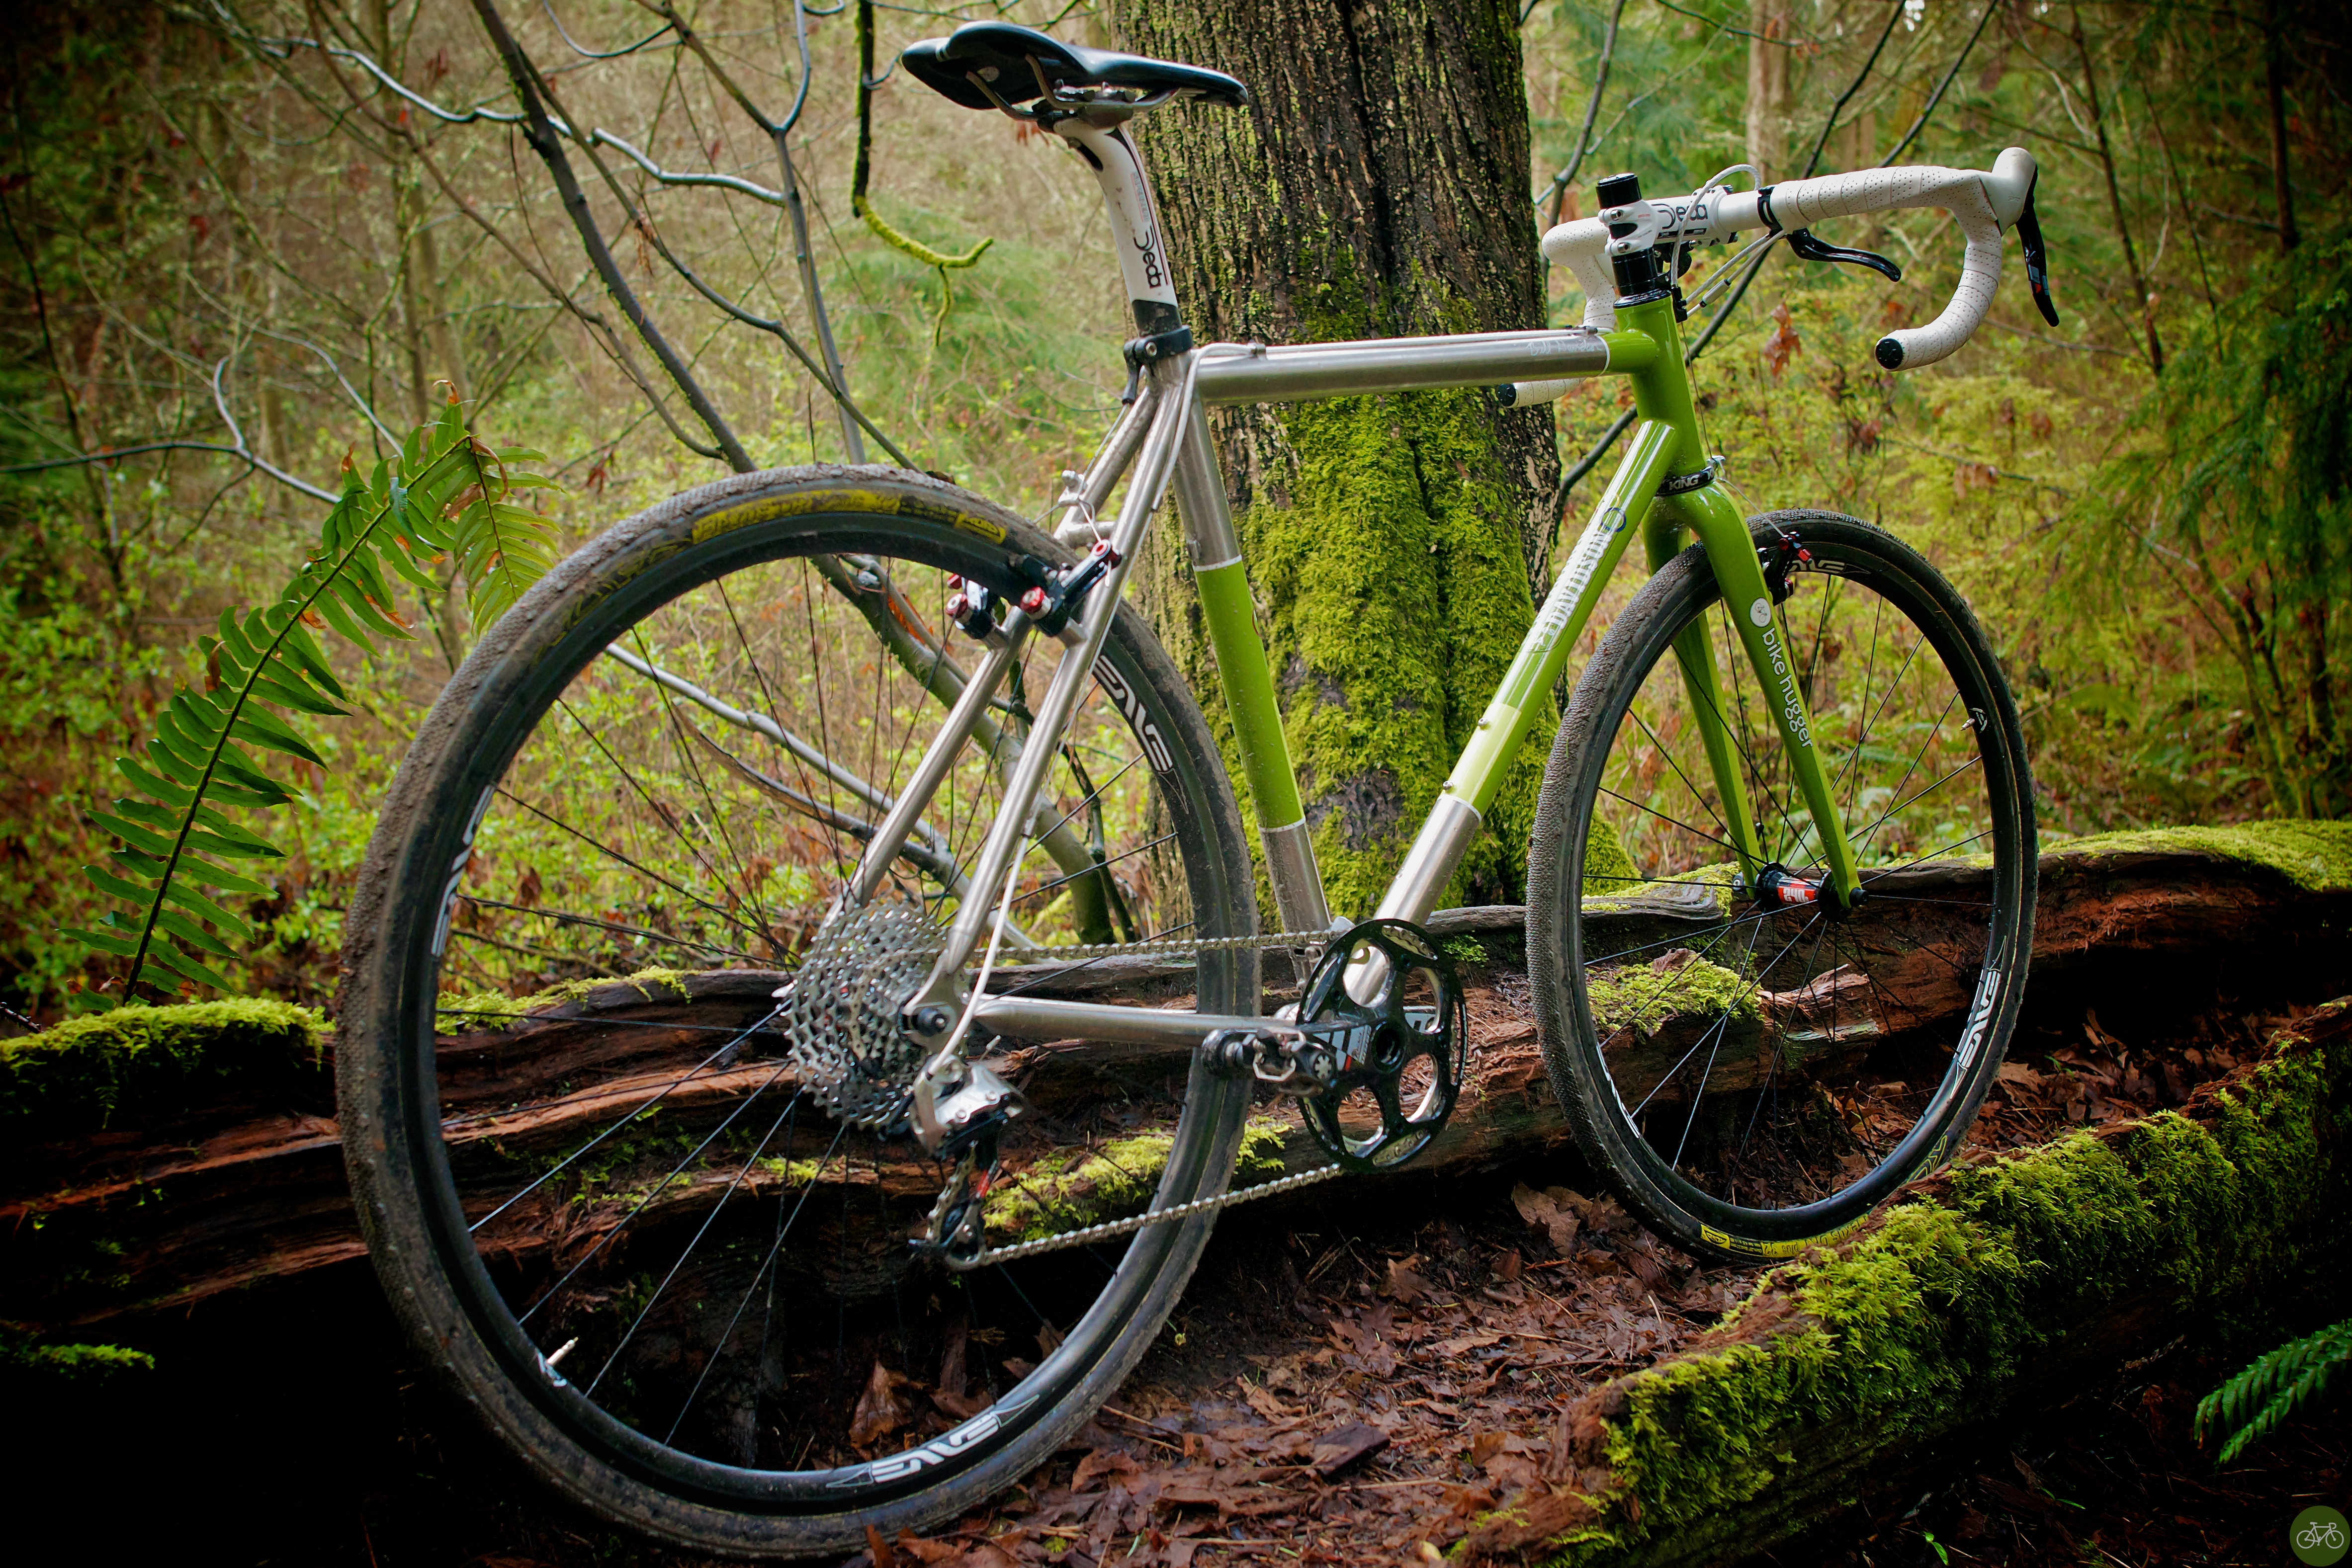 Gully photos of the D-Plus, our latest #makebikes project.